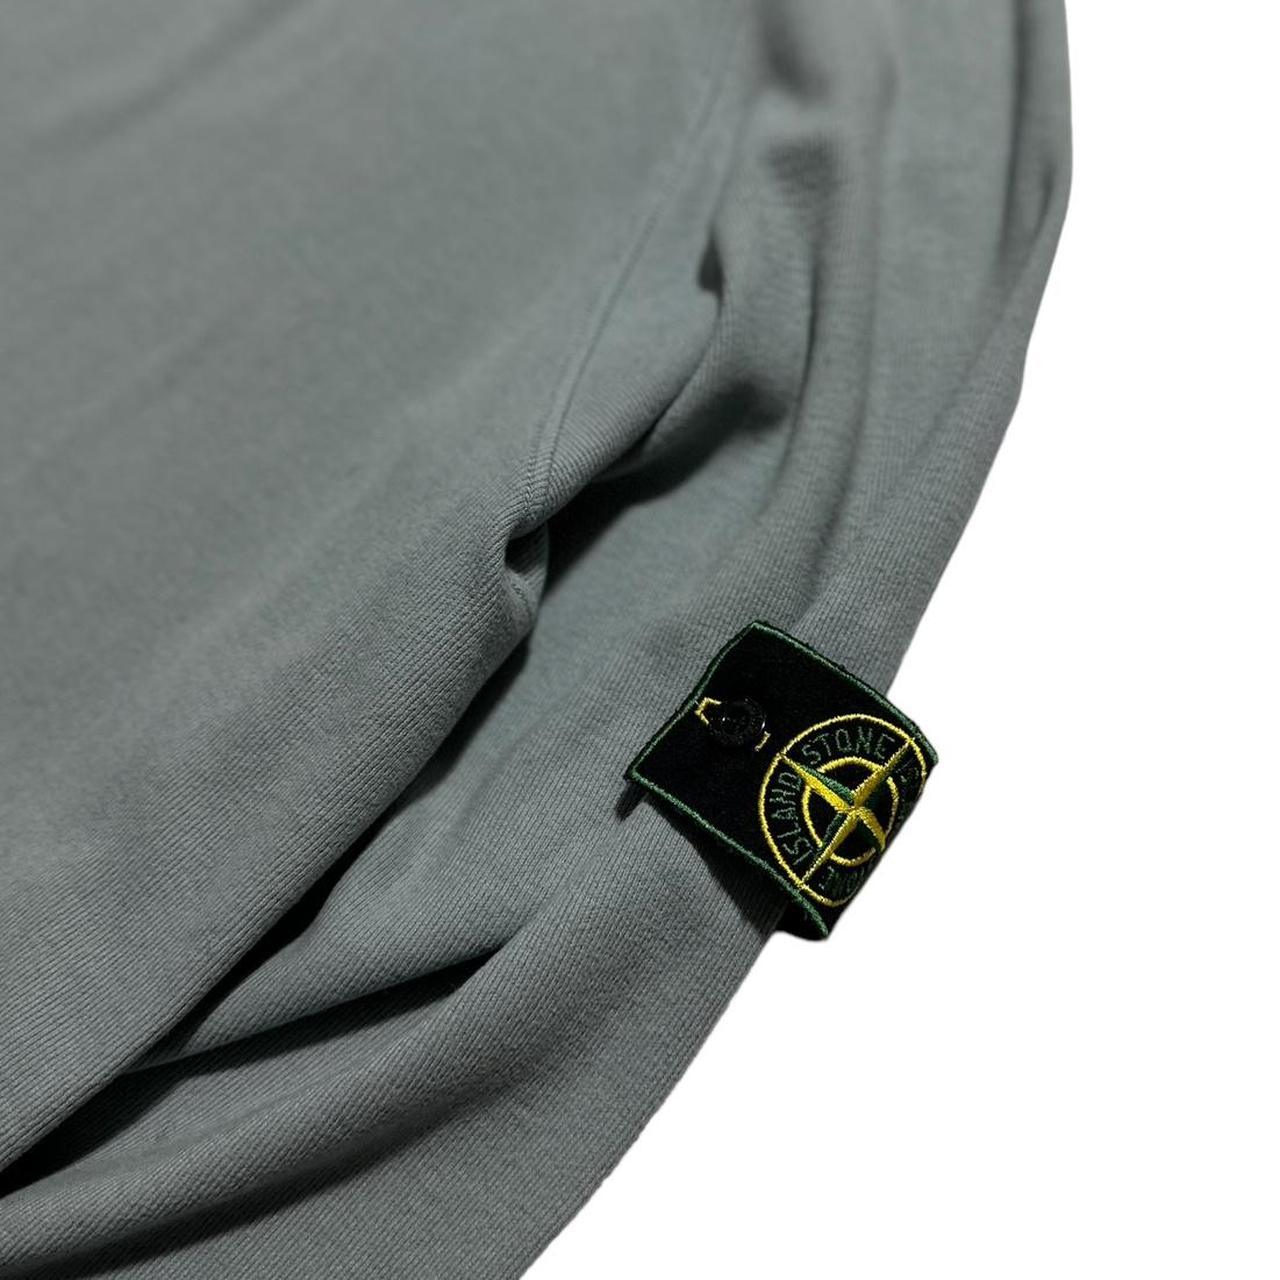 Stone Island 1995 Ribbed Cotton Pullover Jumper - Known Source